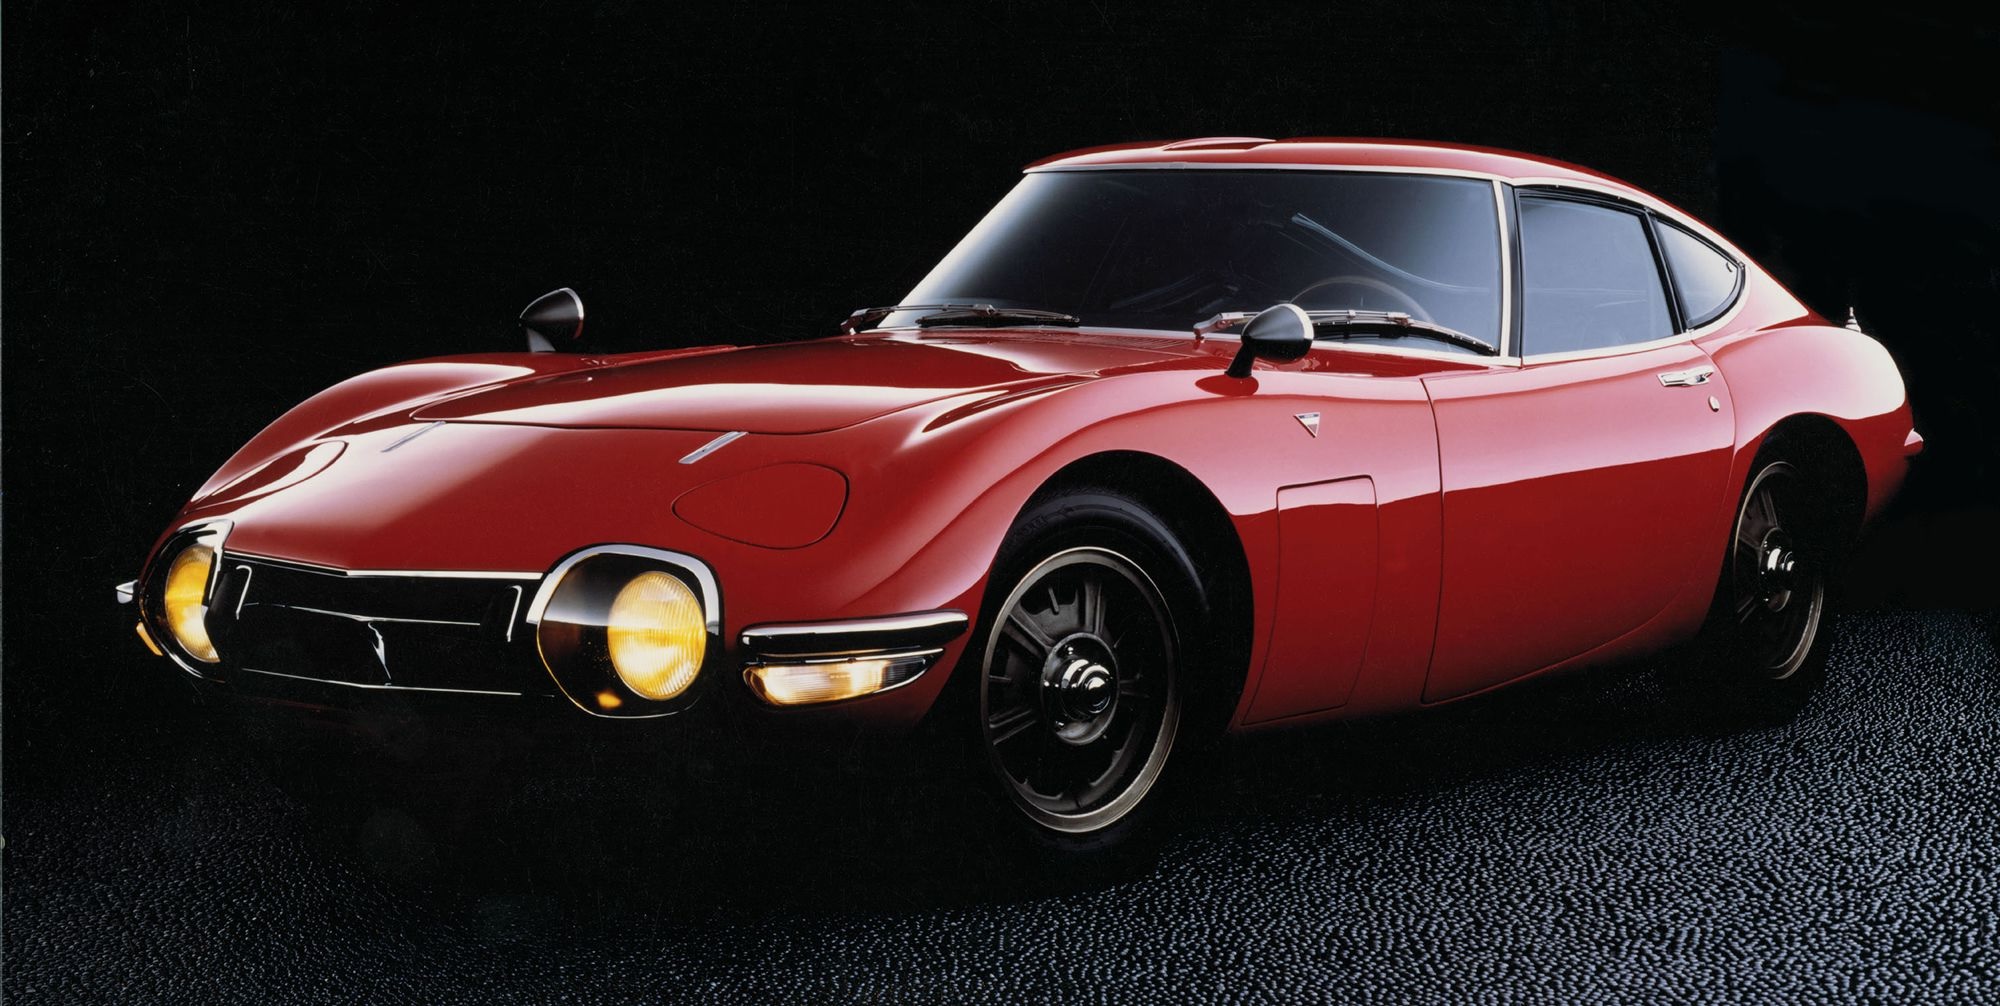 27-great-facts-about-cars-in-the-1960s